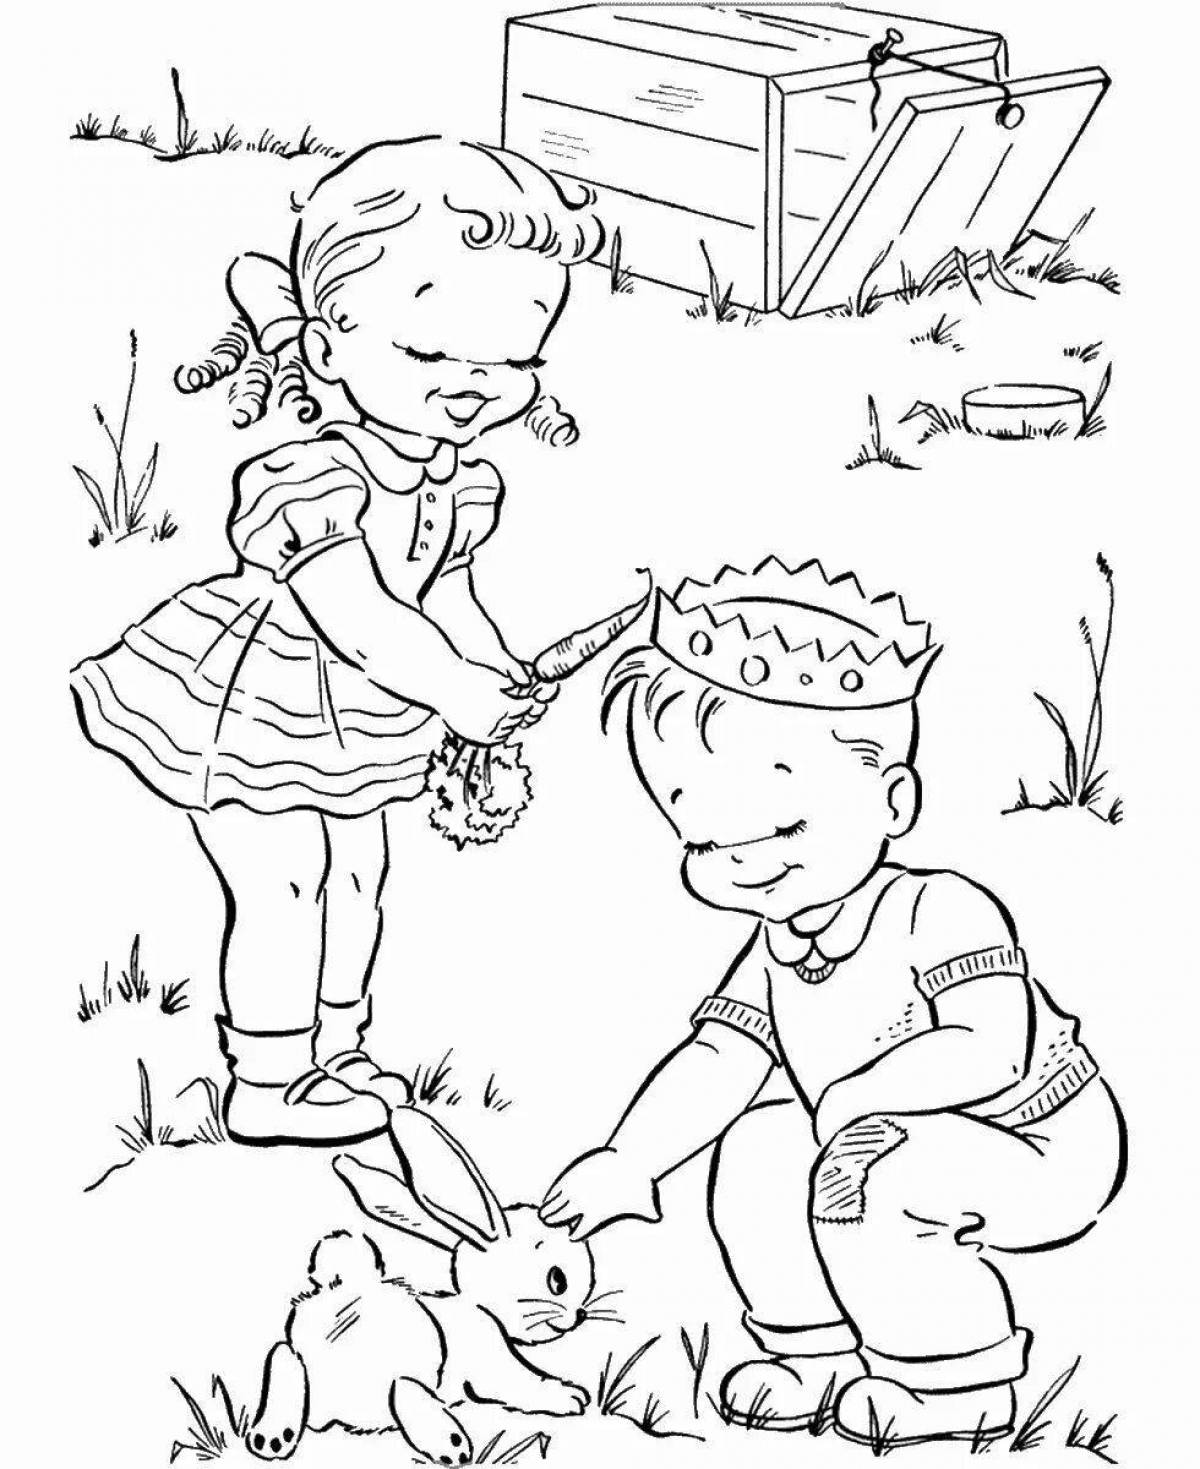 Coloring page joyful concern for nature